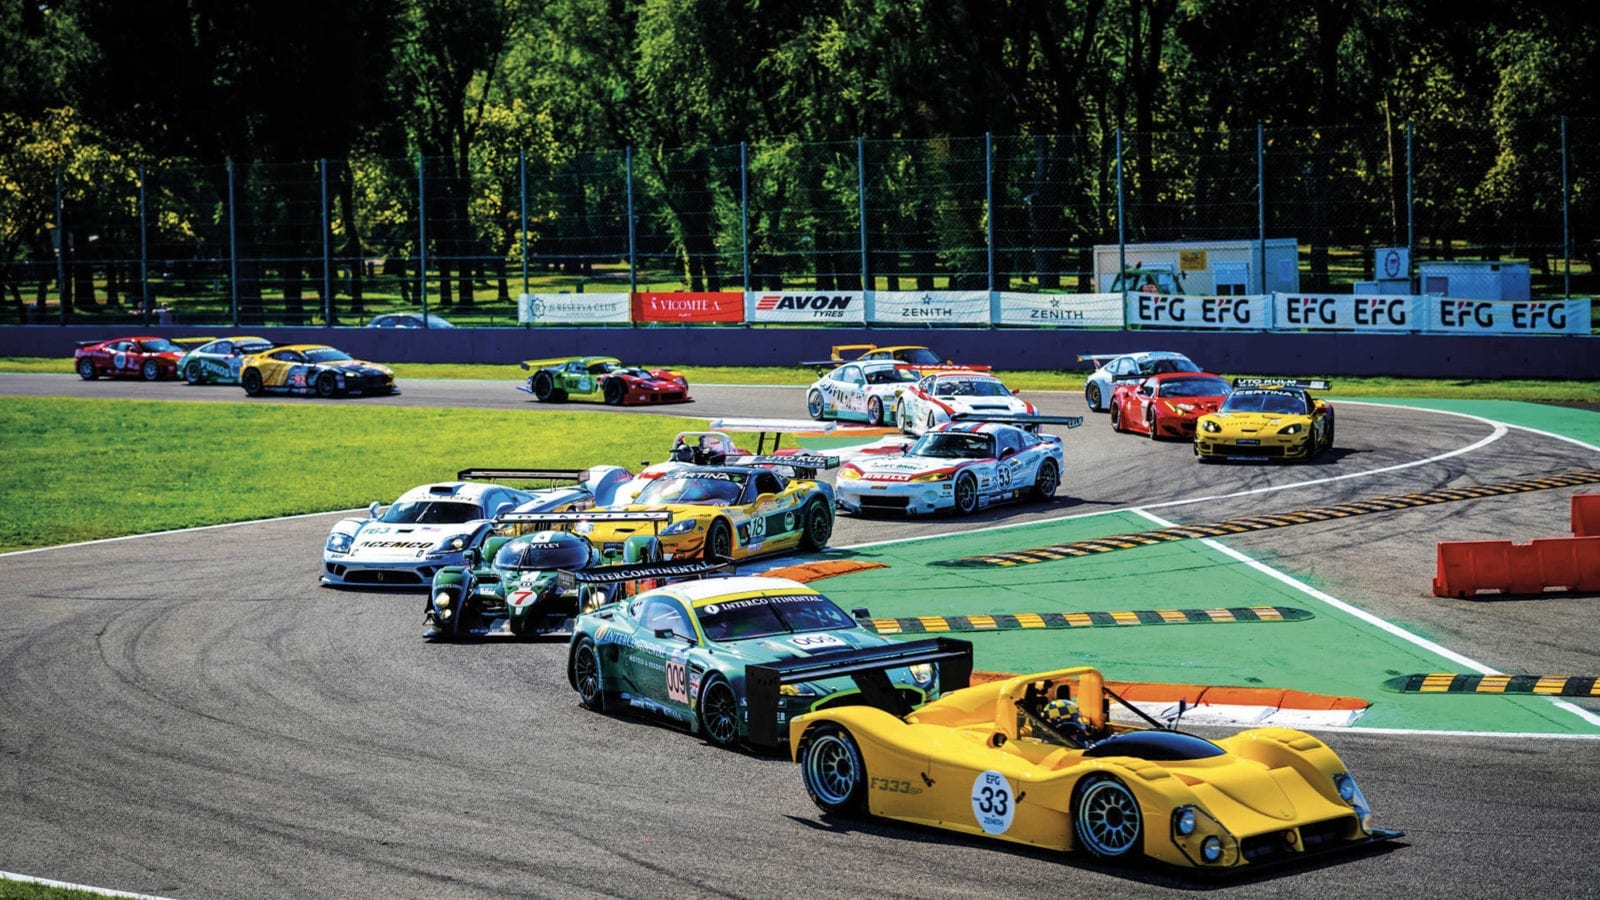 Le Mans cars at the Monza Historic event